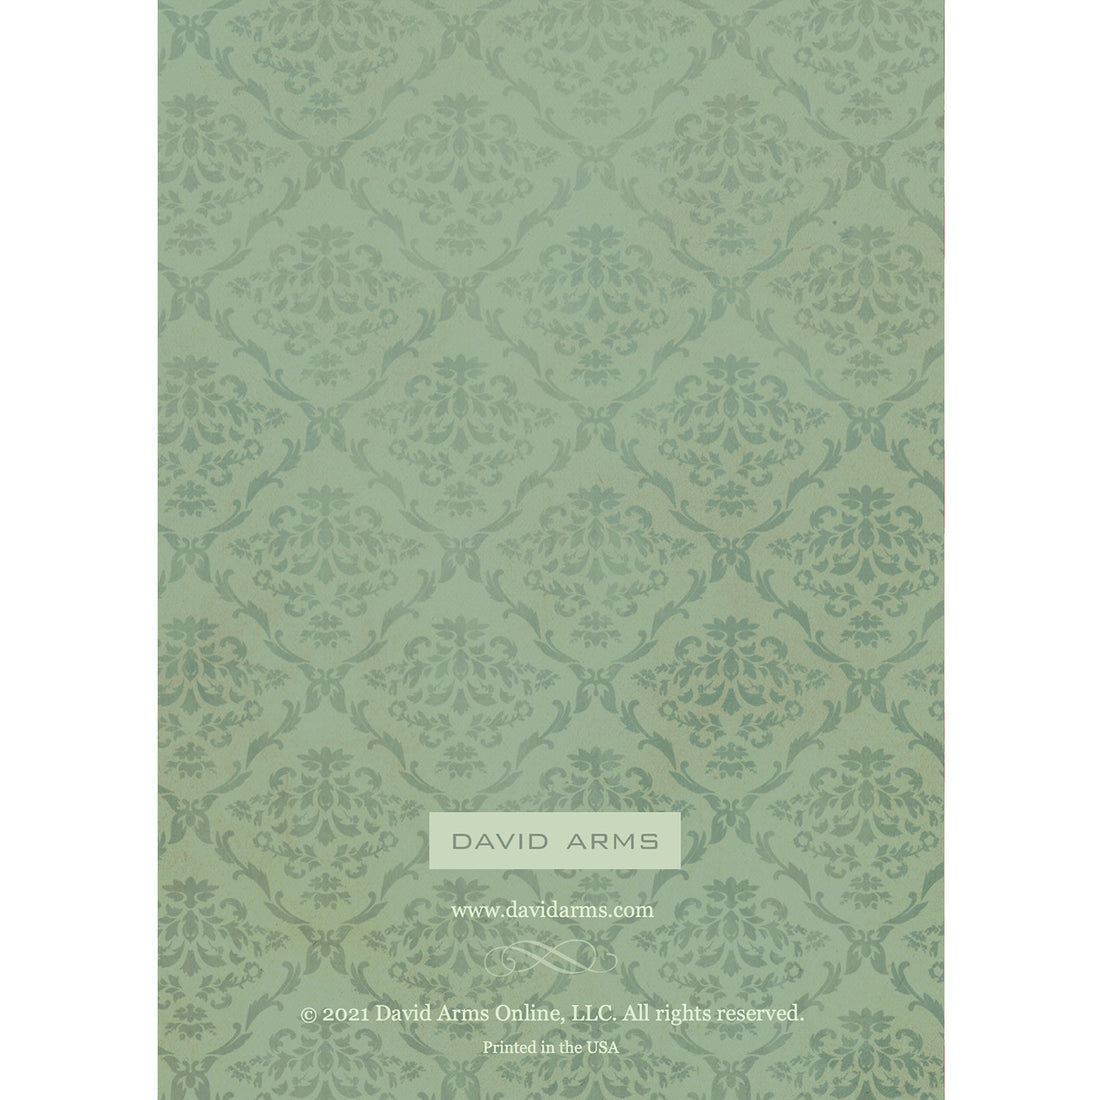 The green damask pattern back side of the greeting card designed by David Arms.